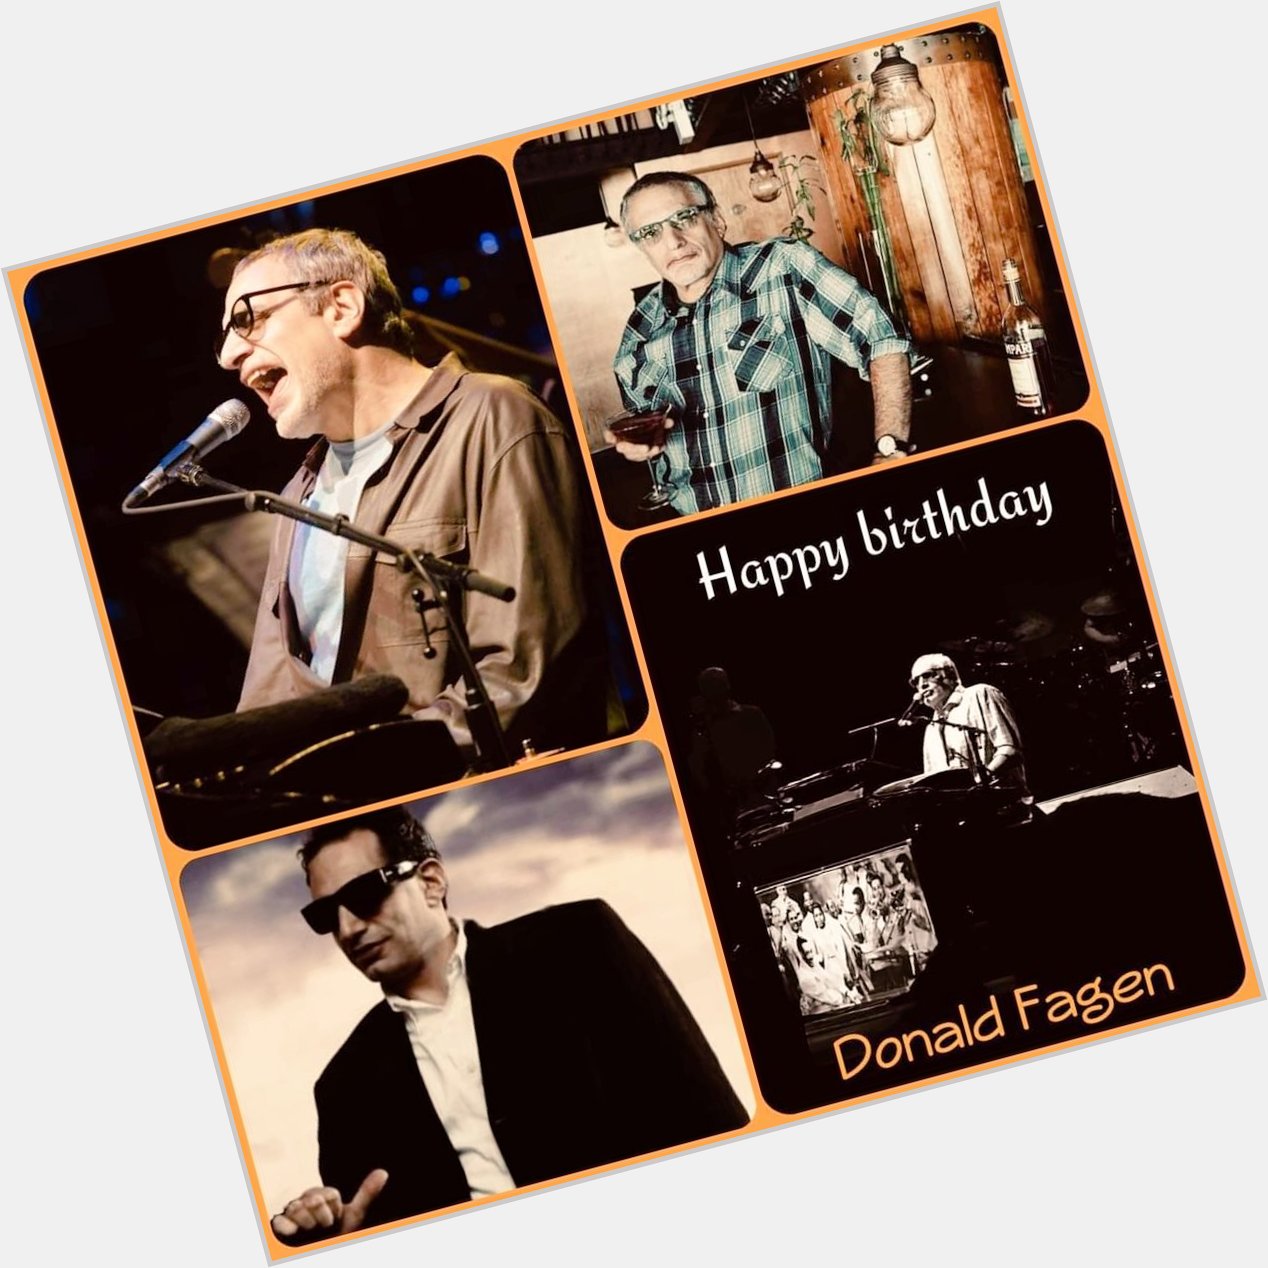   Happy Birthday to Steely Dan\s Donald Fagen who turns 74 years old today 